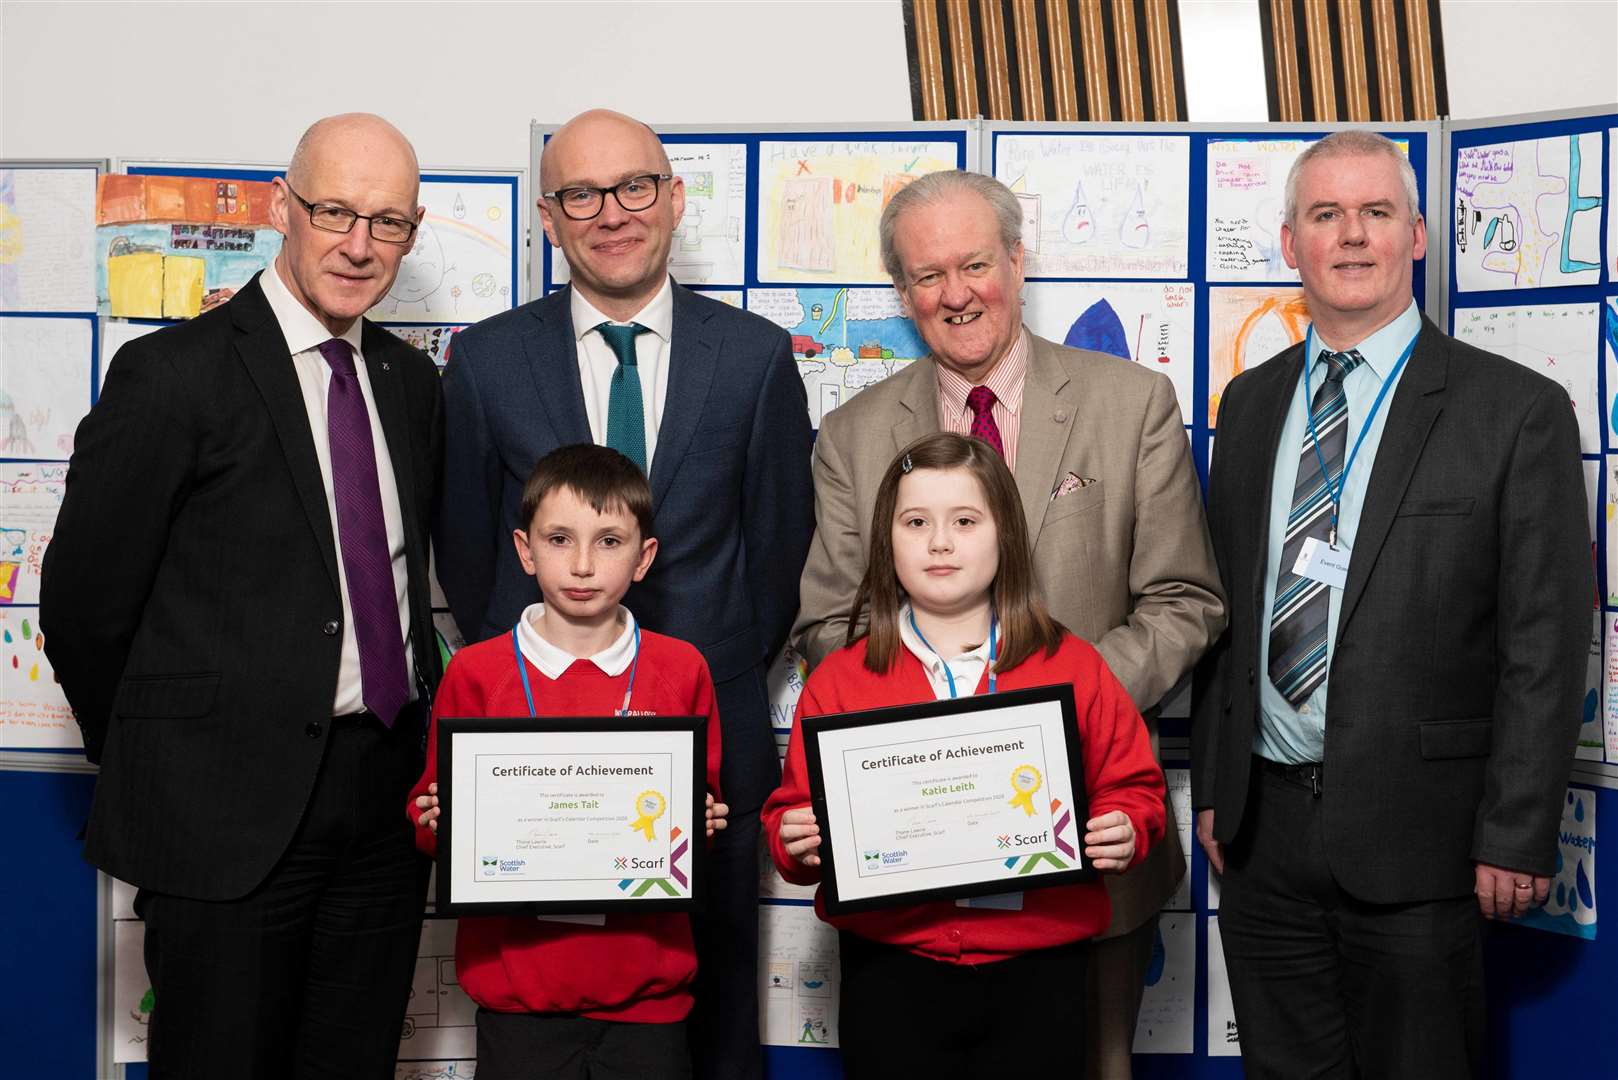 Katie Leith pictured with Fraserburgh pupil James Tait and (from left) Deputy First Minister John Swinney, Brian Lironi of Scottish Water, Banffshire and Buchan Coast MSP Stewart Stevenson and Thane Lawrie, of Scarf.